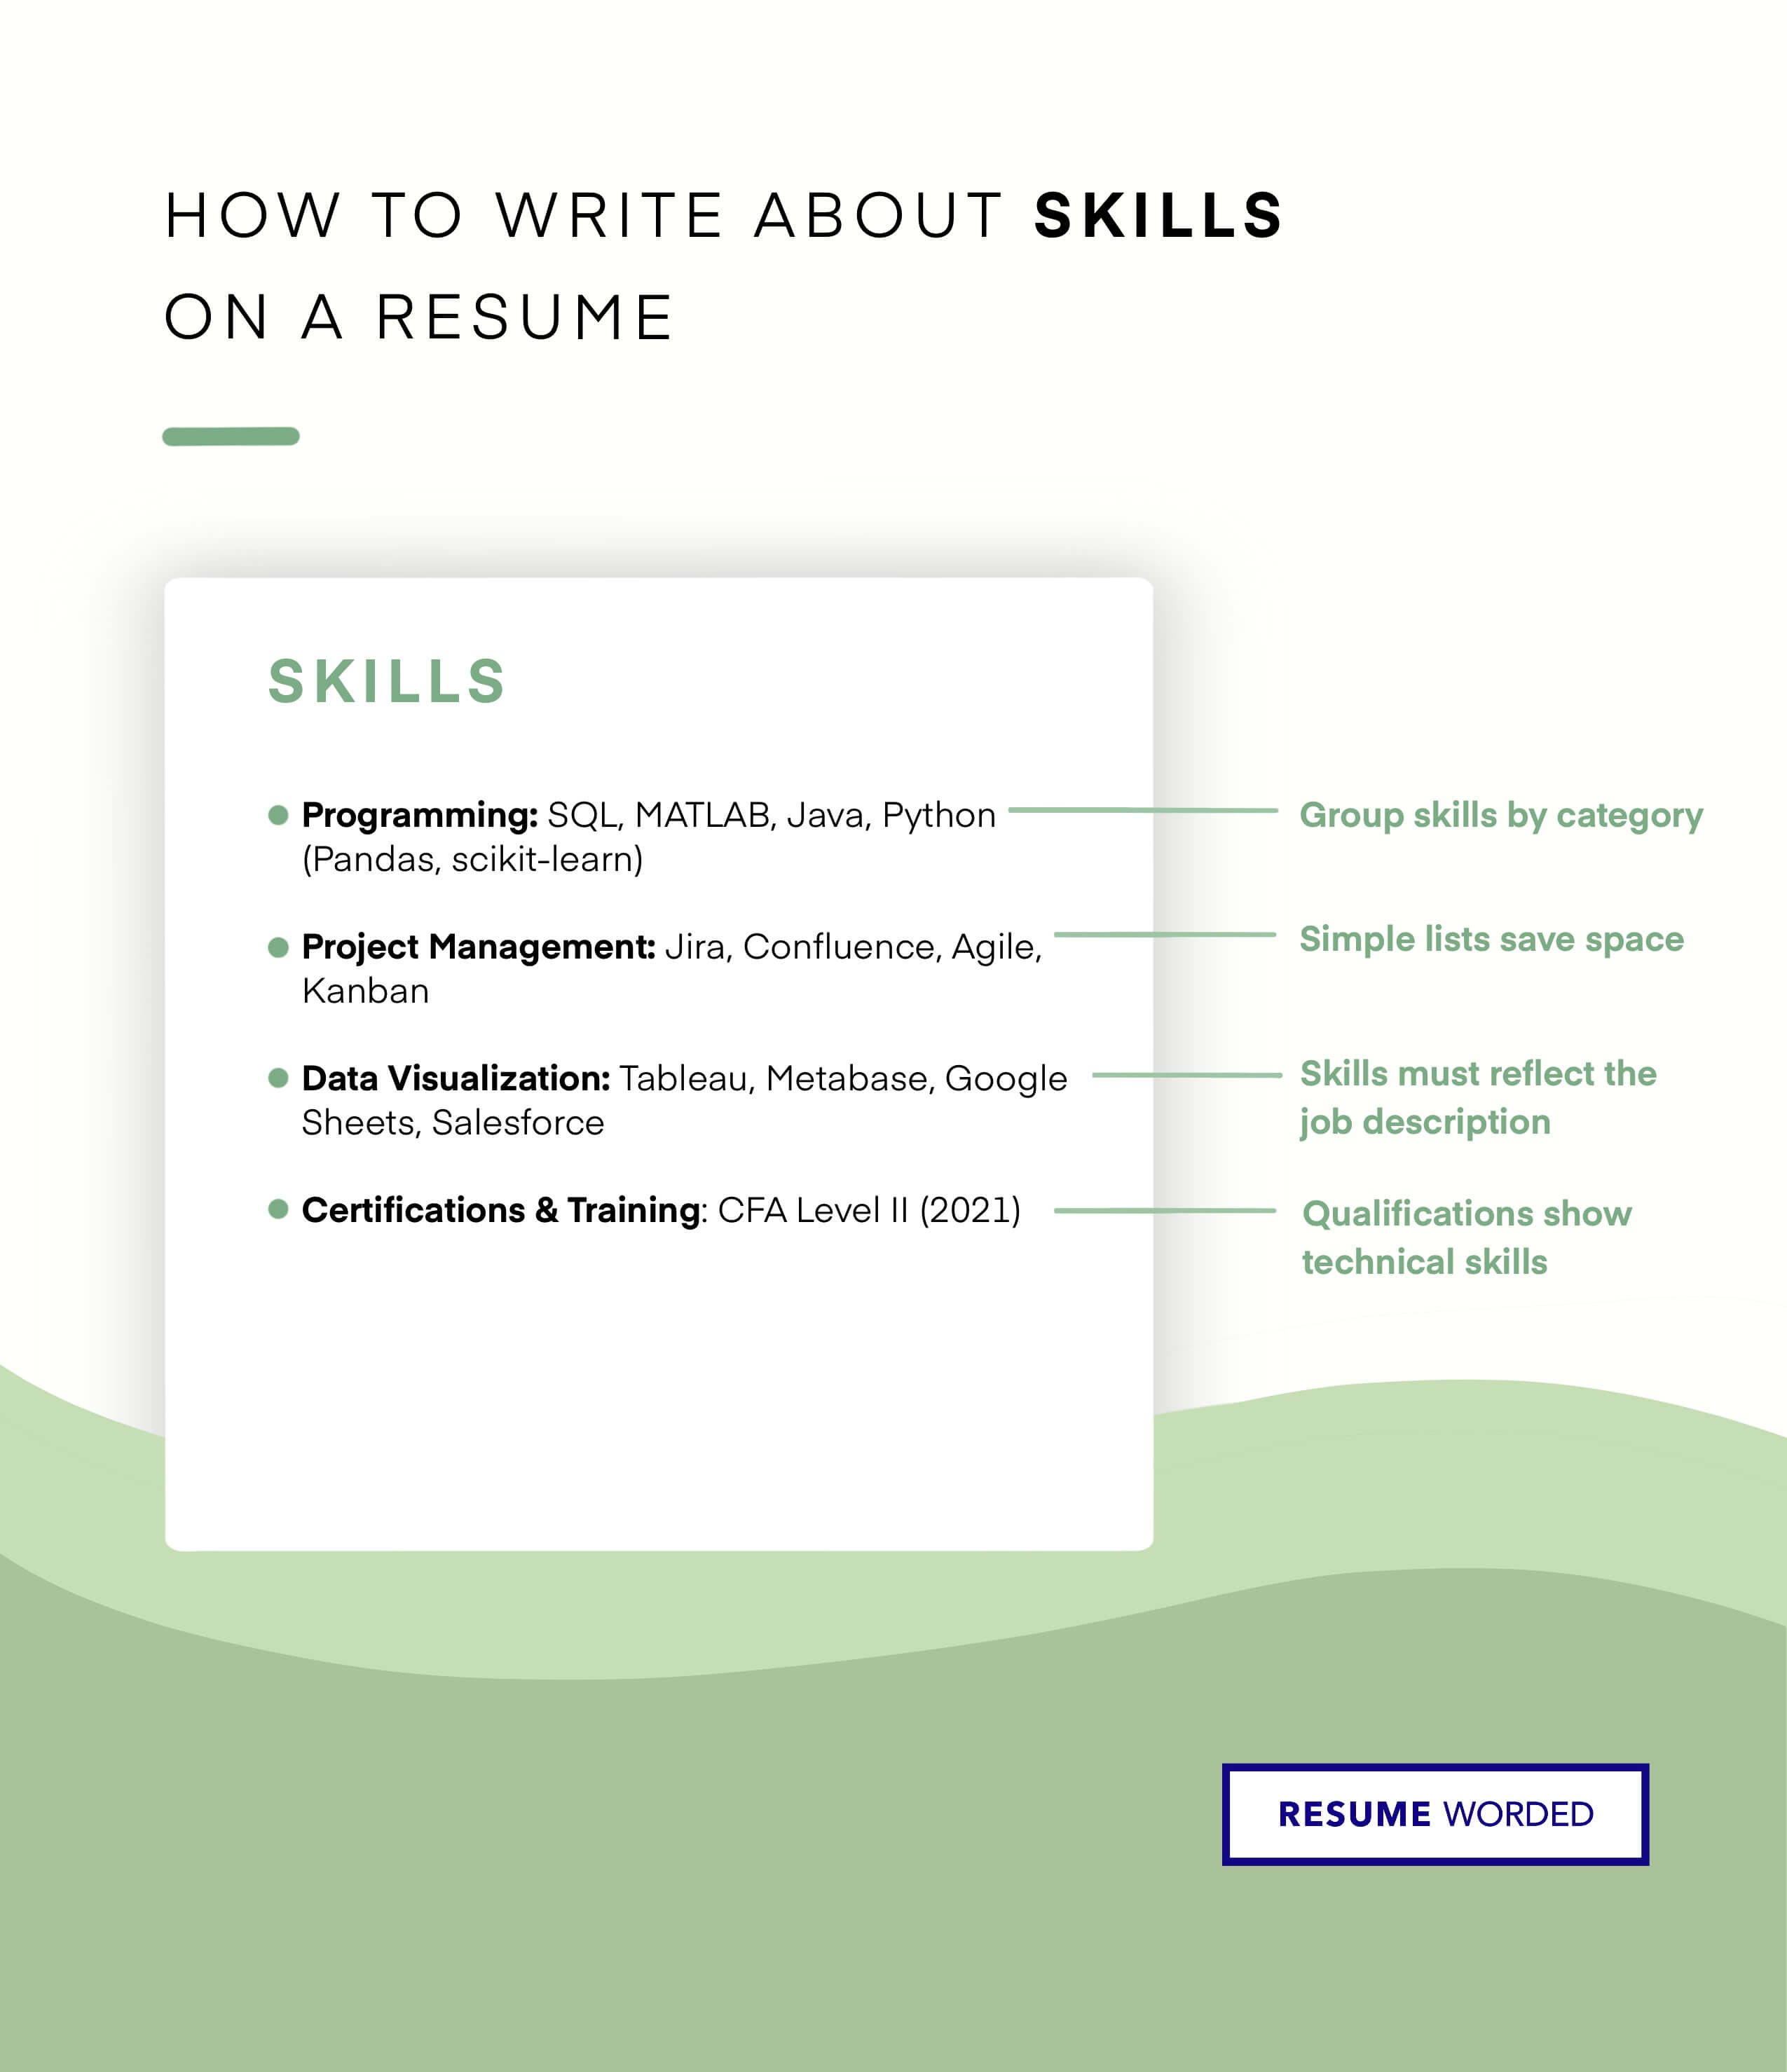 List CAO-related skills. - Chief Administrative Officer Resume